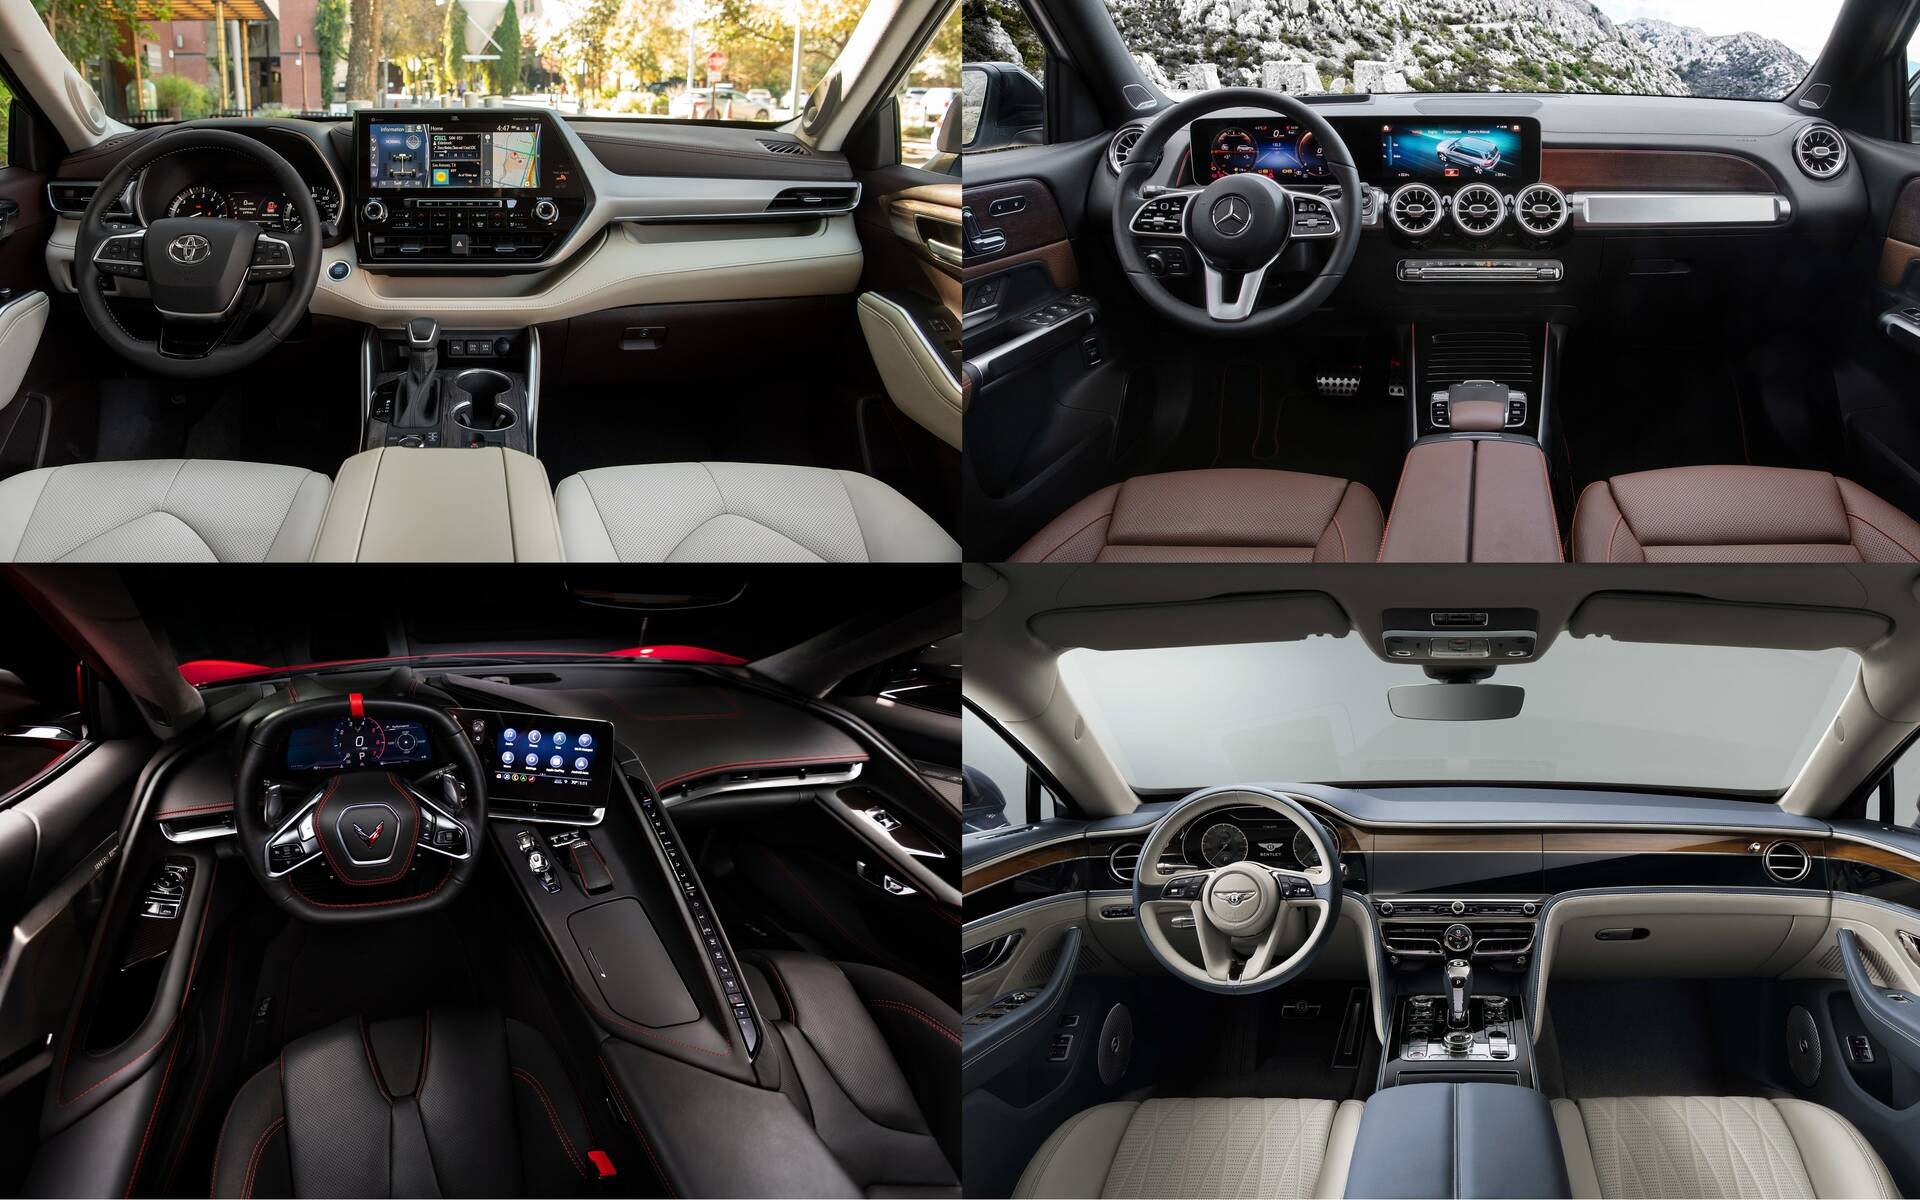 The 10 Best Car Interiors of 2018 According to WardsAuto - The Car